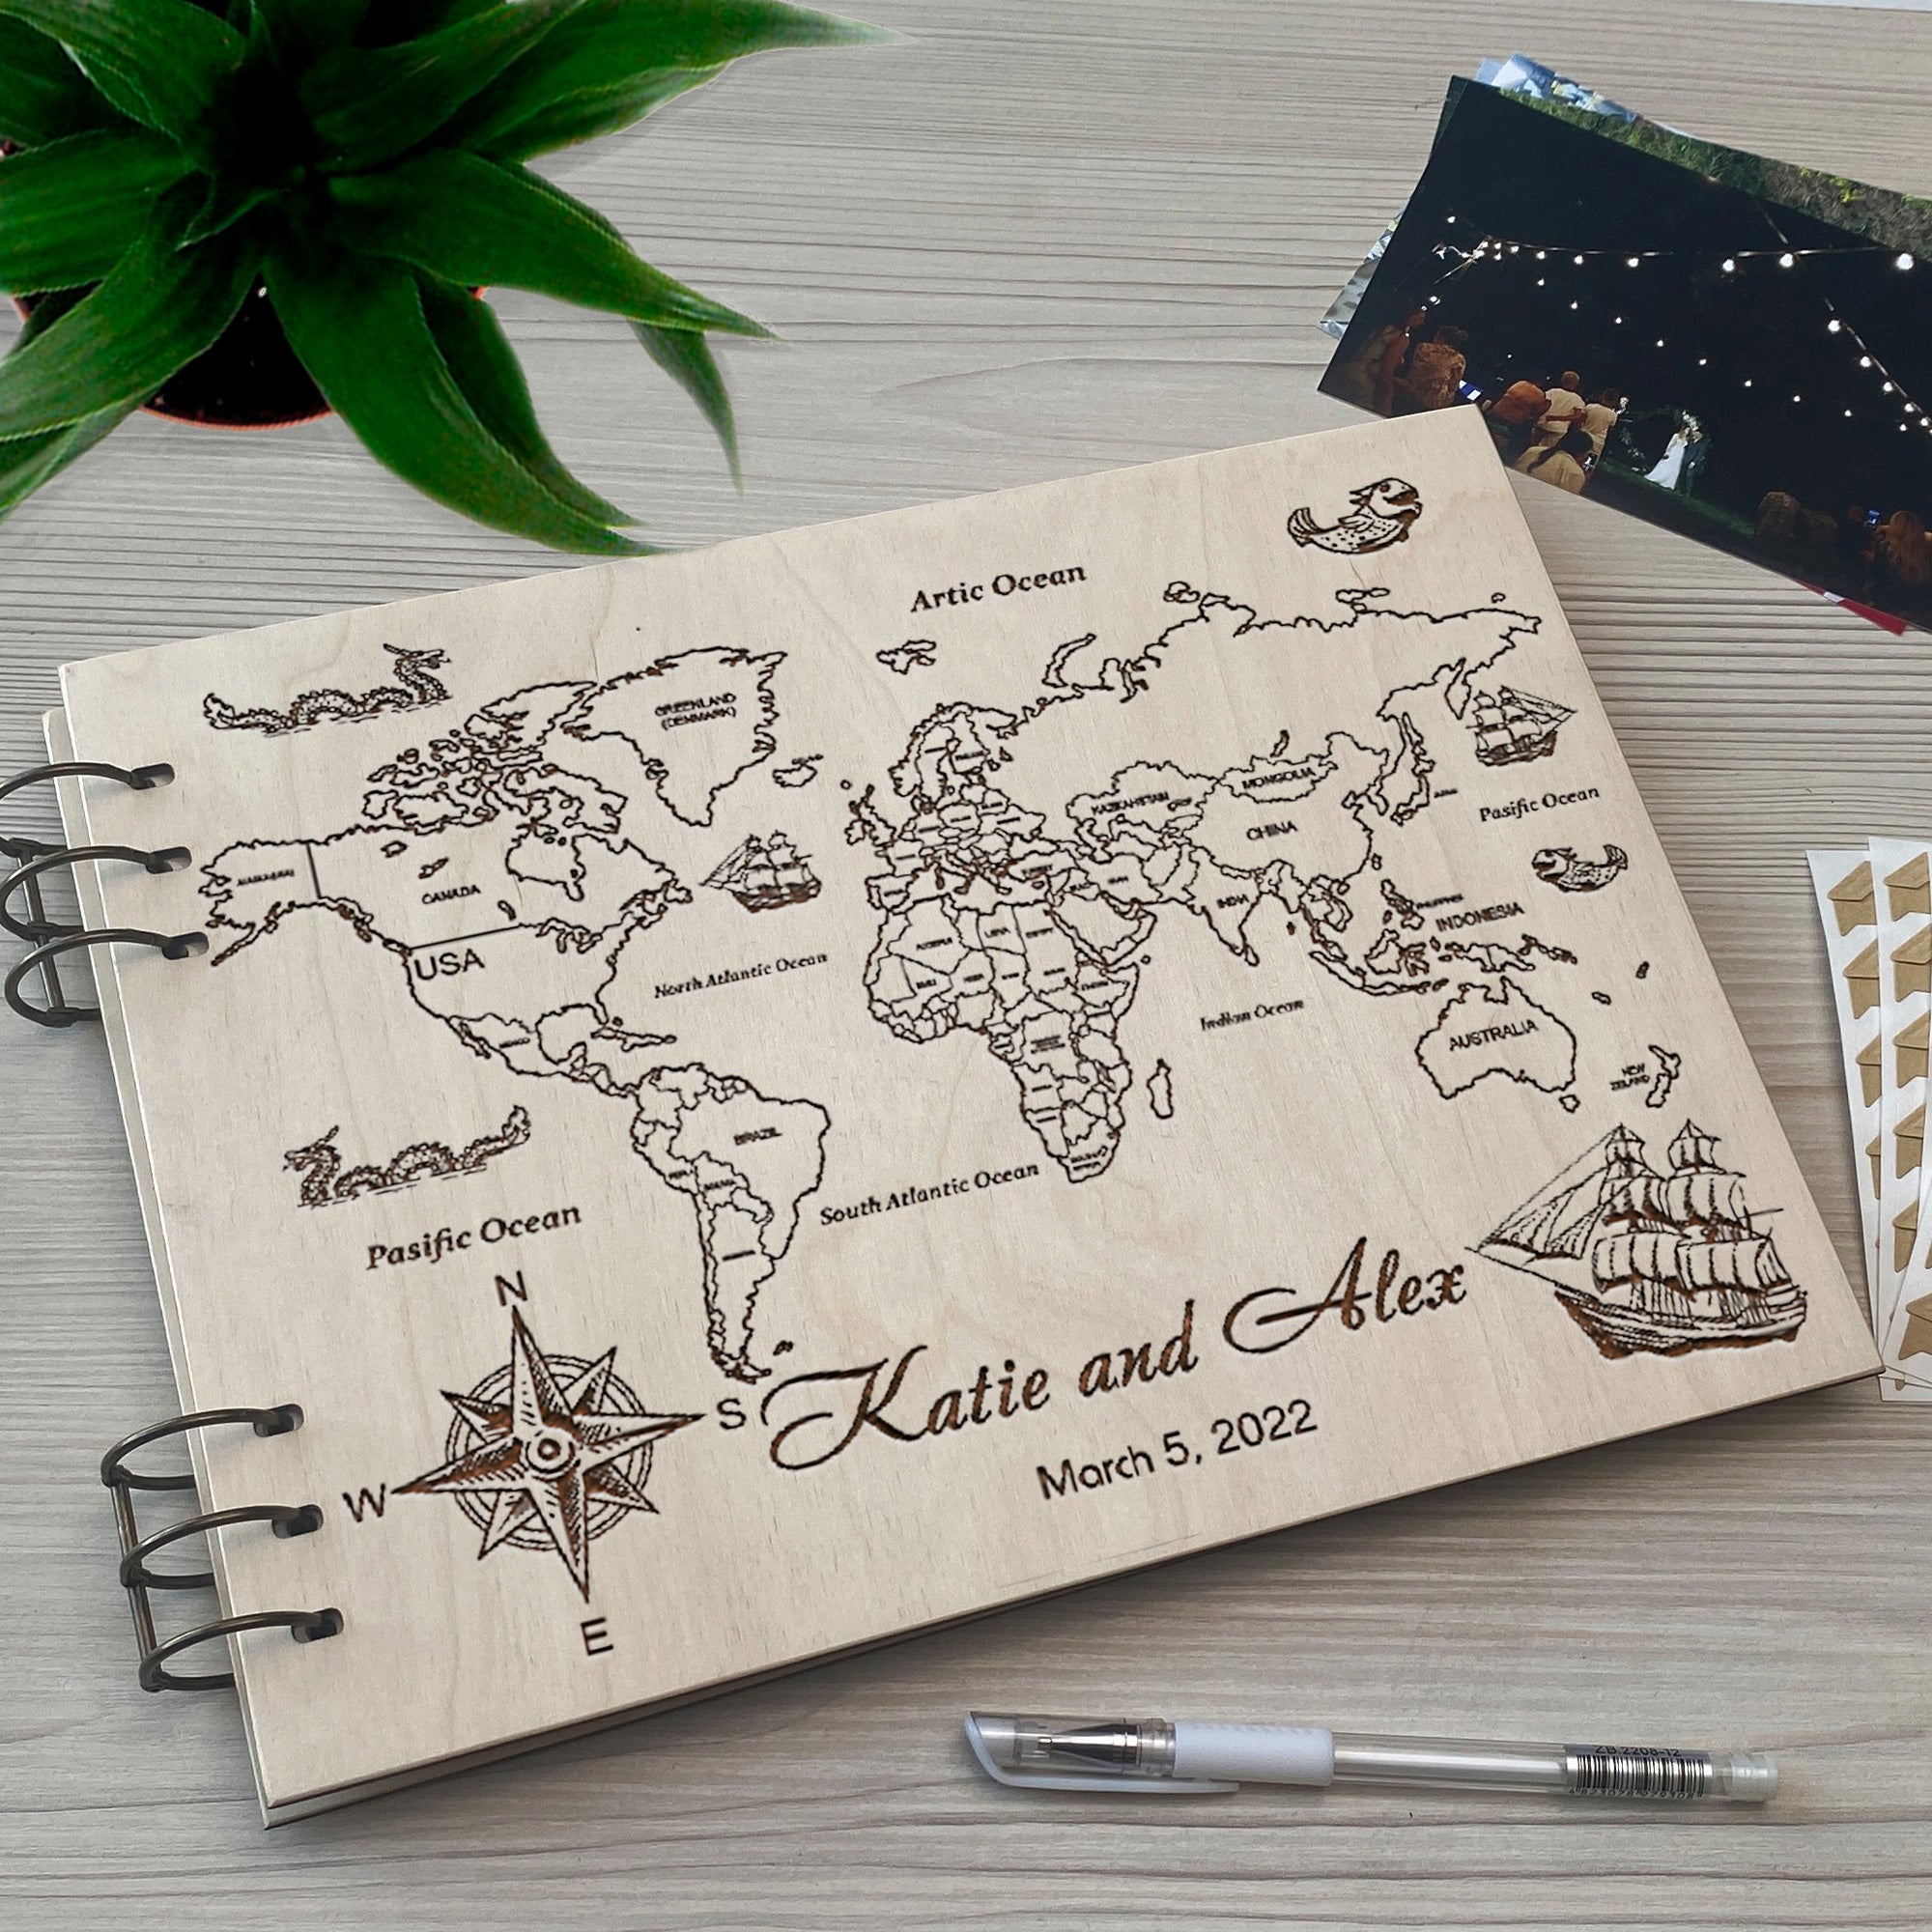 Personalized photo album cover and World map engraving